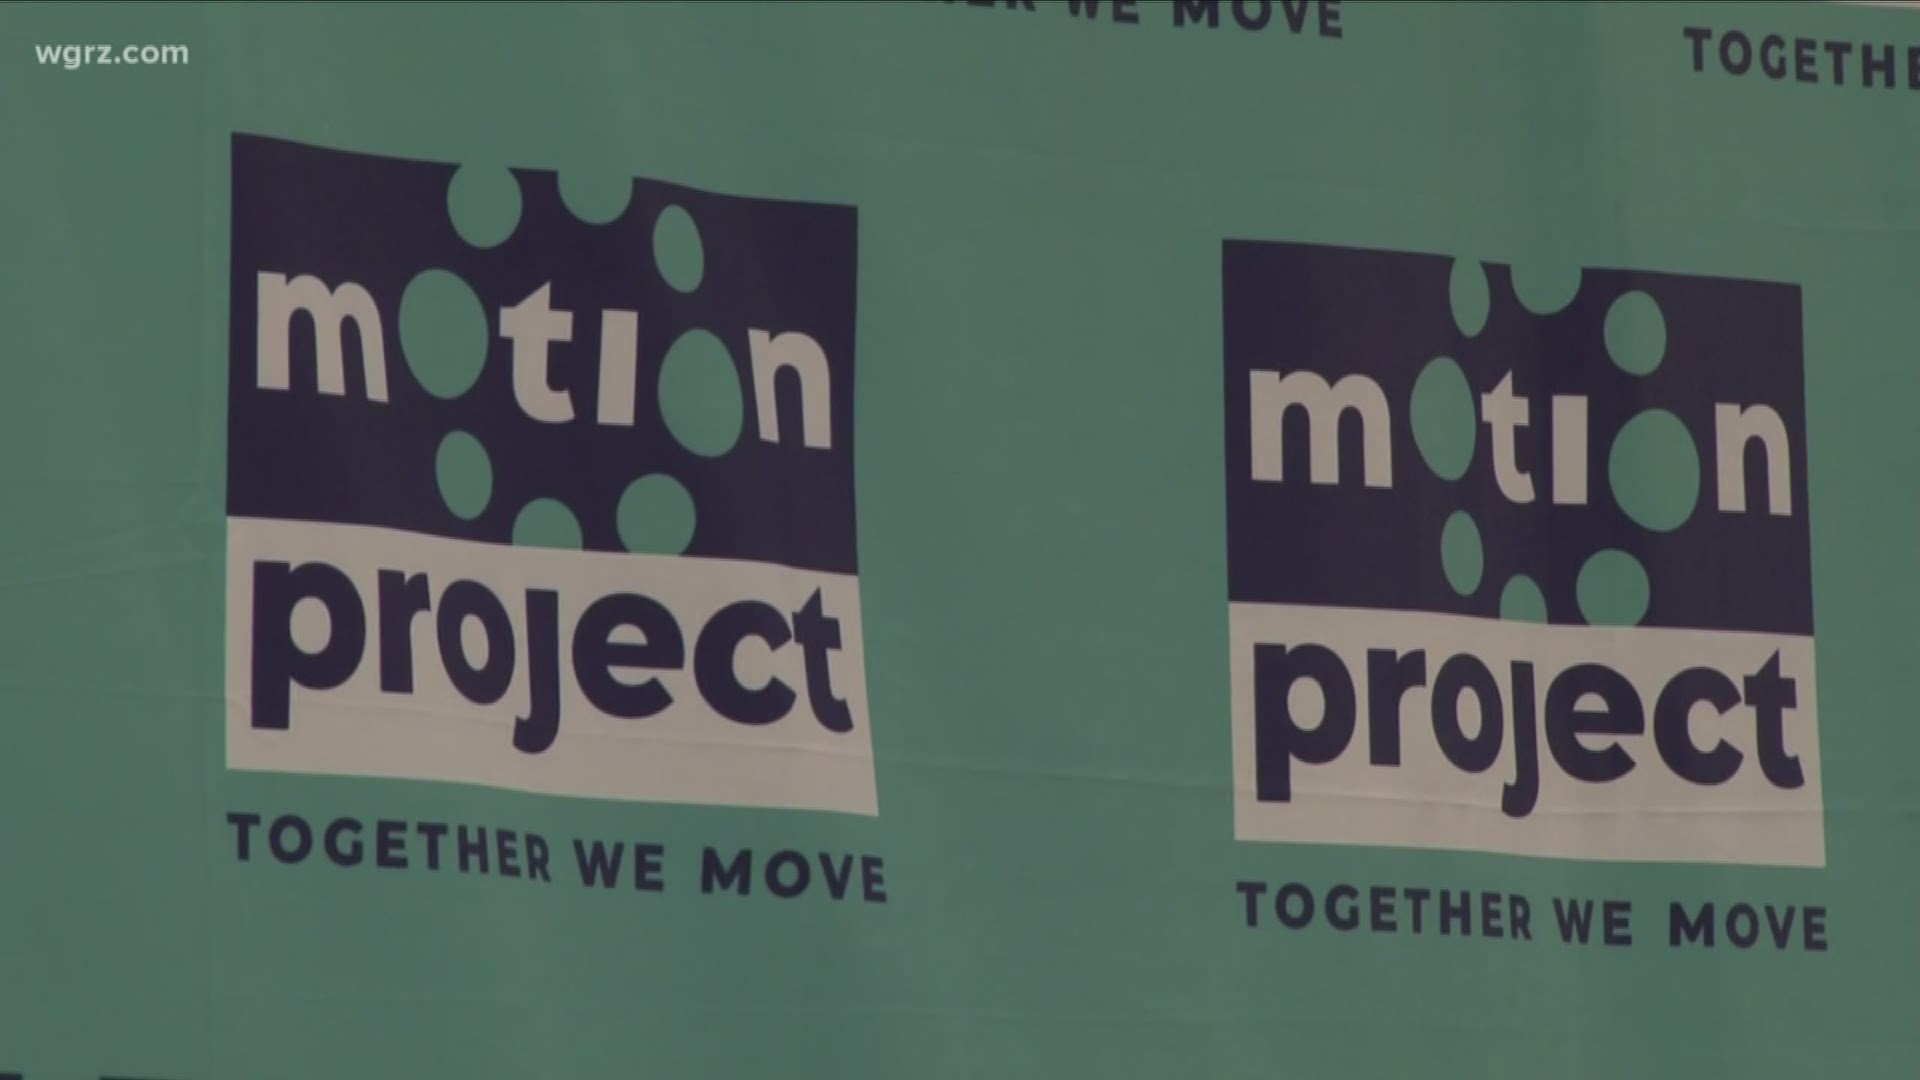 The "Motion Project Foundation" formerly known as the "Wheels with wings foundation" says it plans to open a new paralysis recovery center in Cheektowaga.